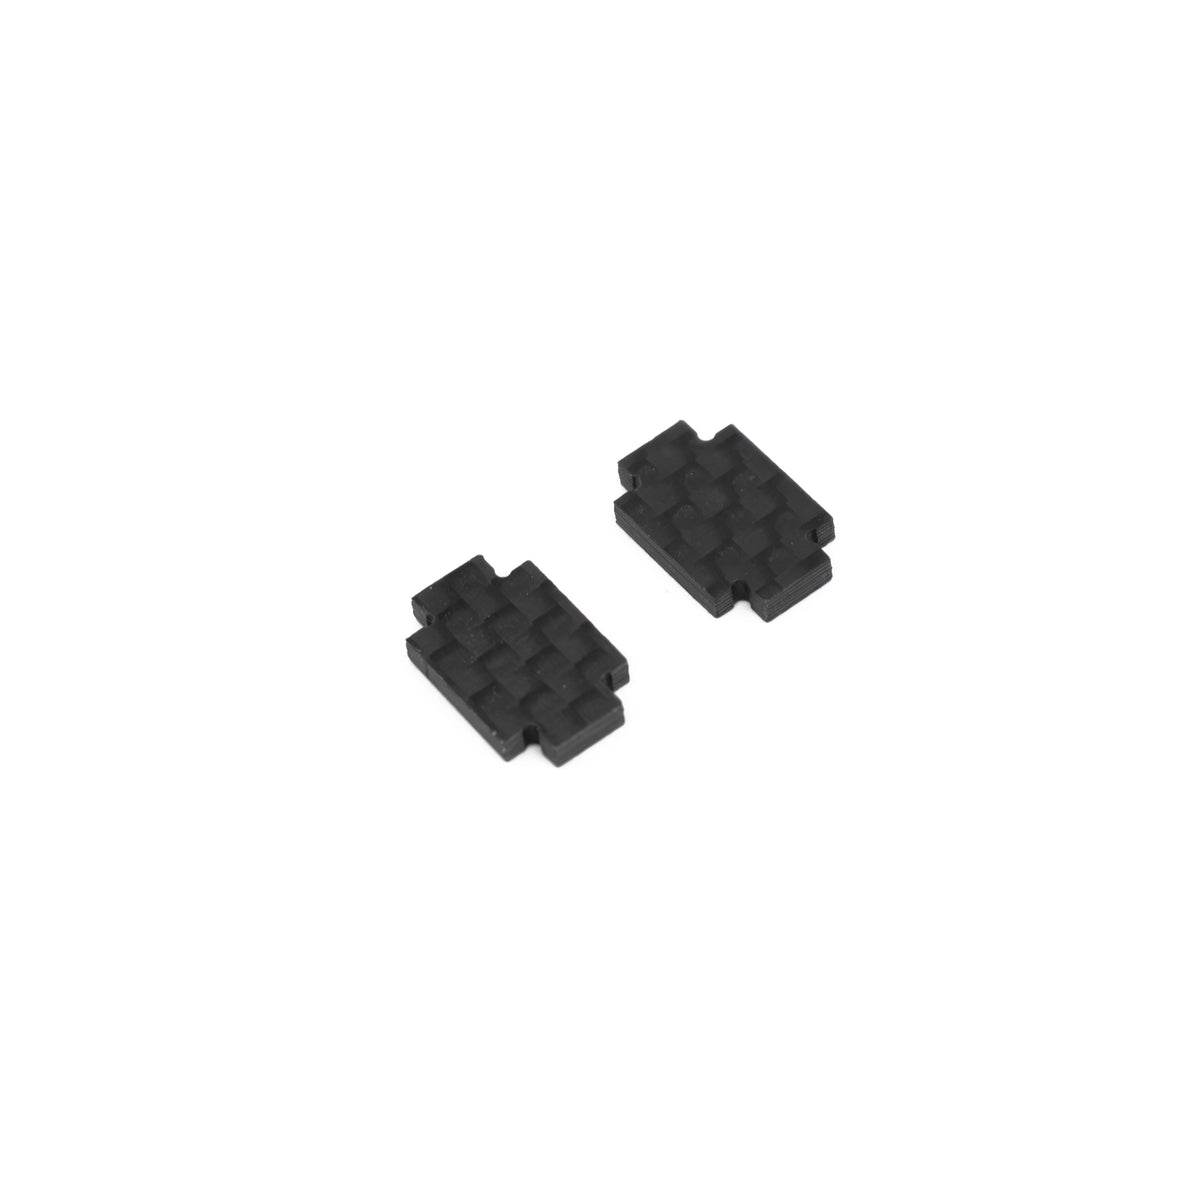 Kronos - Spare Locking Plate - Pack of 2